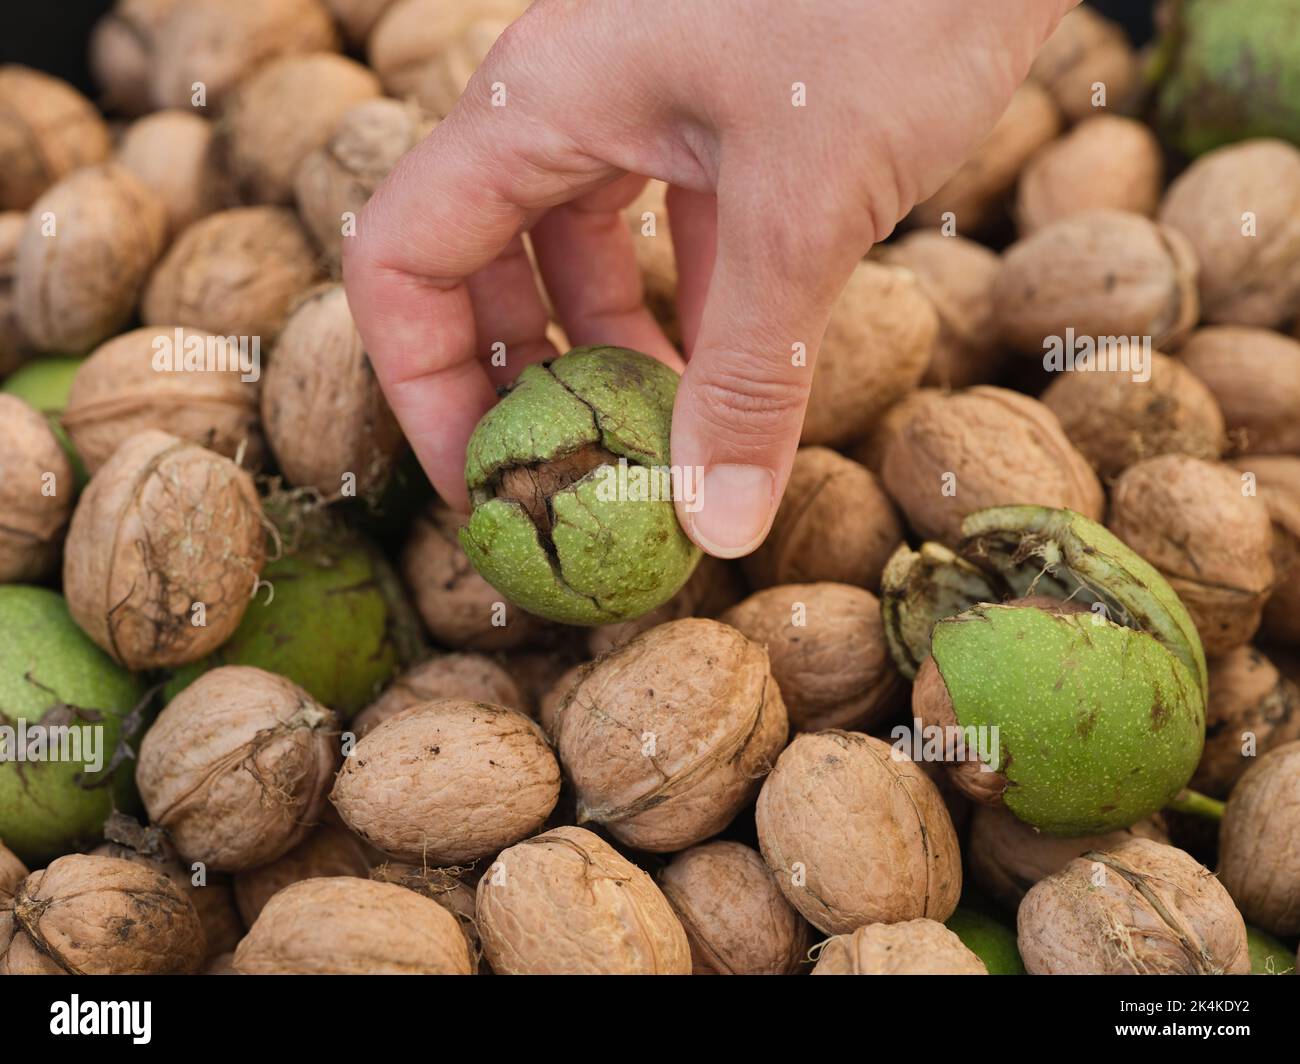 A woman picking up a freshly harvested walnut from a pile of walnuts. Close up. Stock Photo